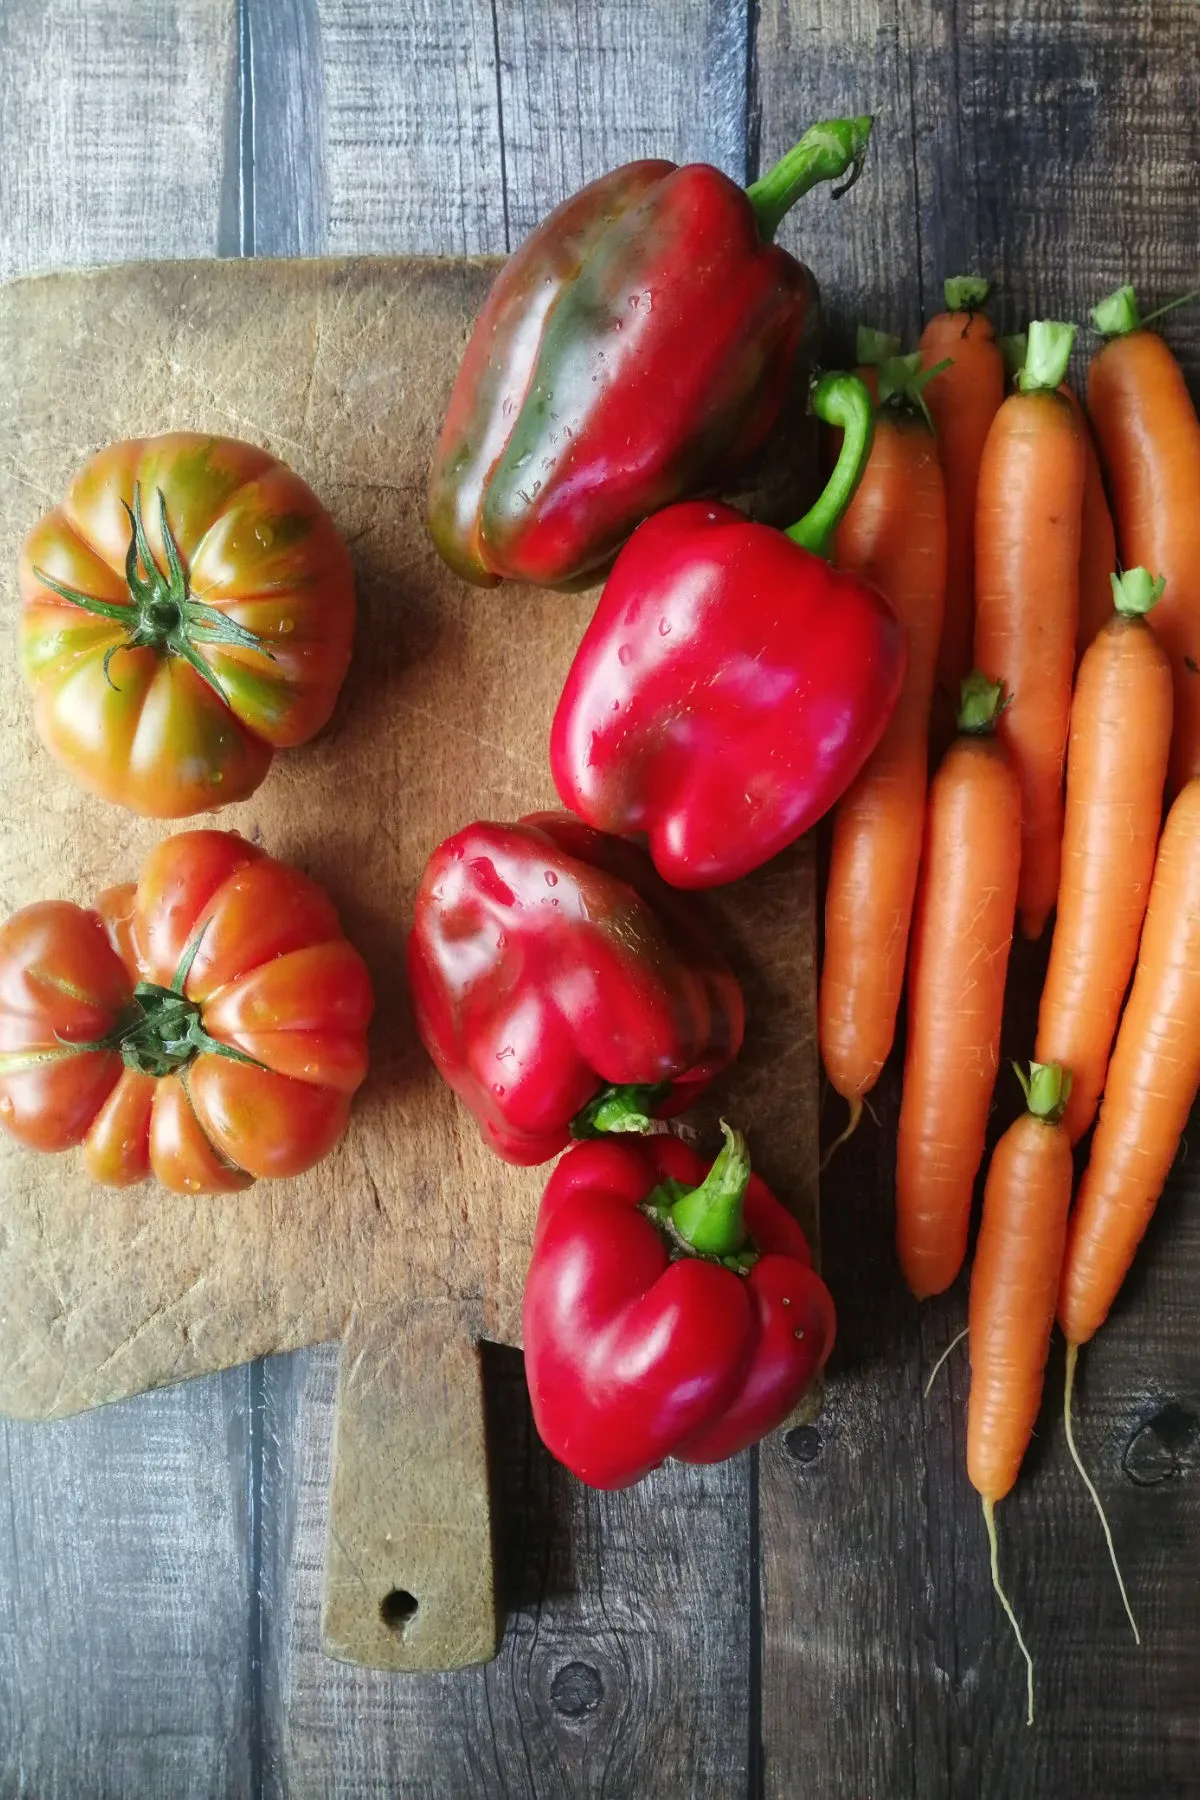 Some peppers and carrots sit on a chopping board.